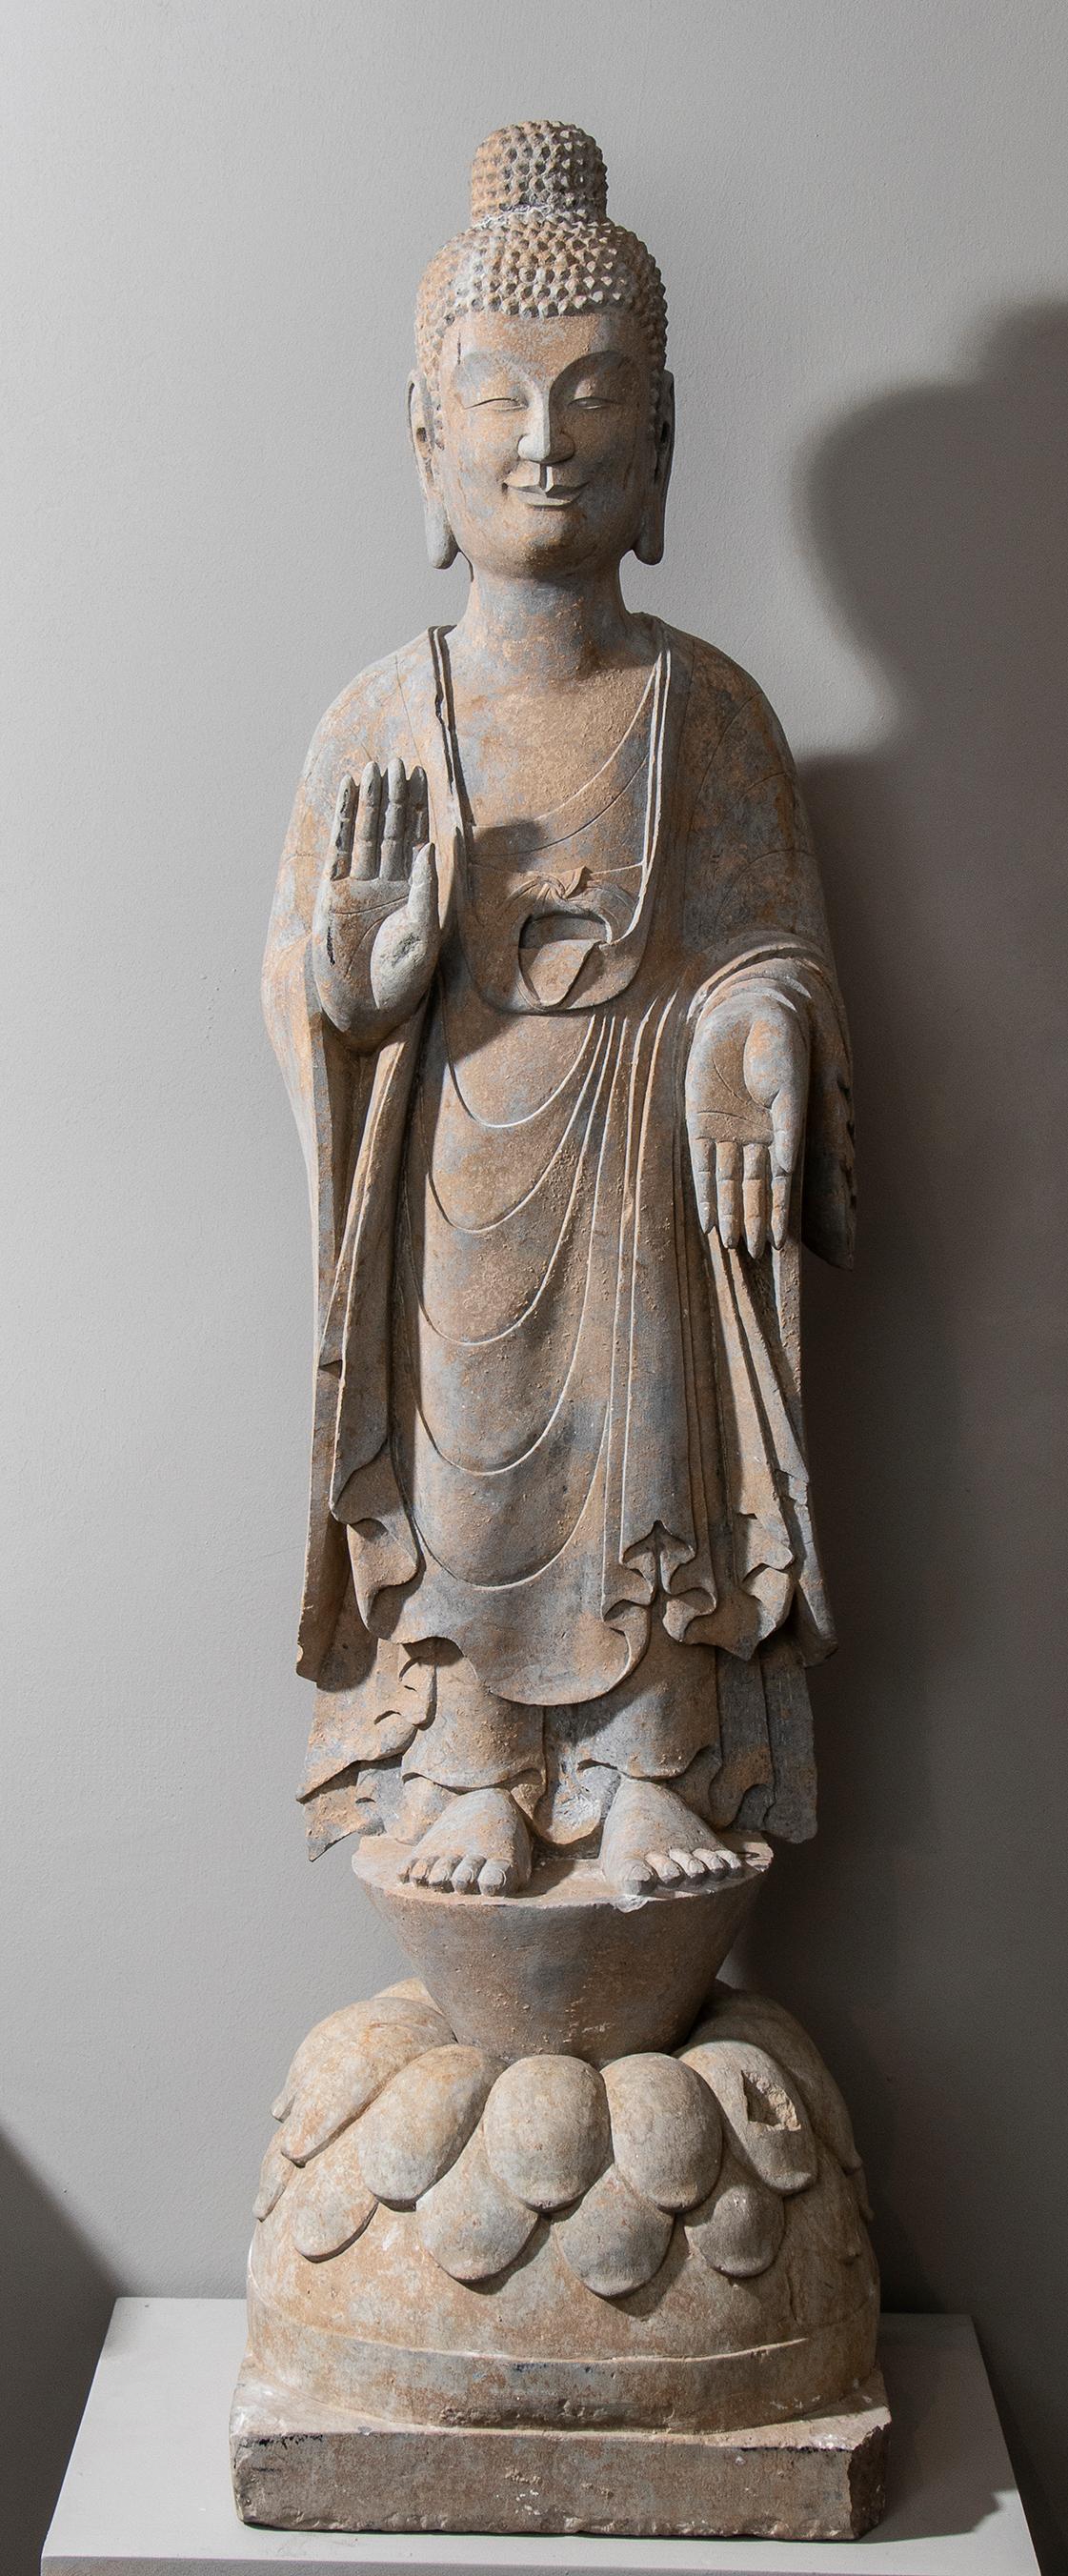 Unknown Figurative Sculpture - Stone Sculpture of Buddha in the style of the Tang And Wei Dynasties